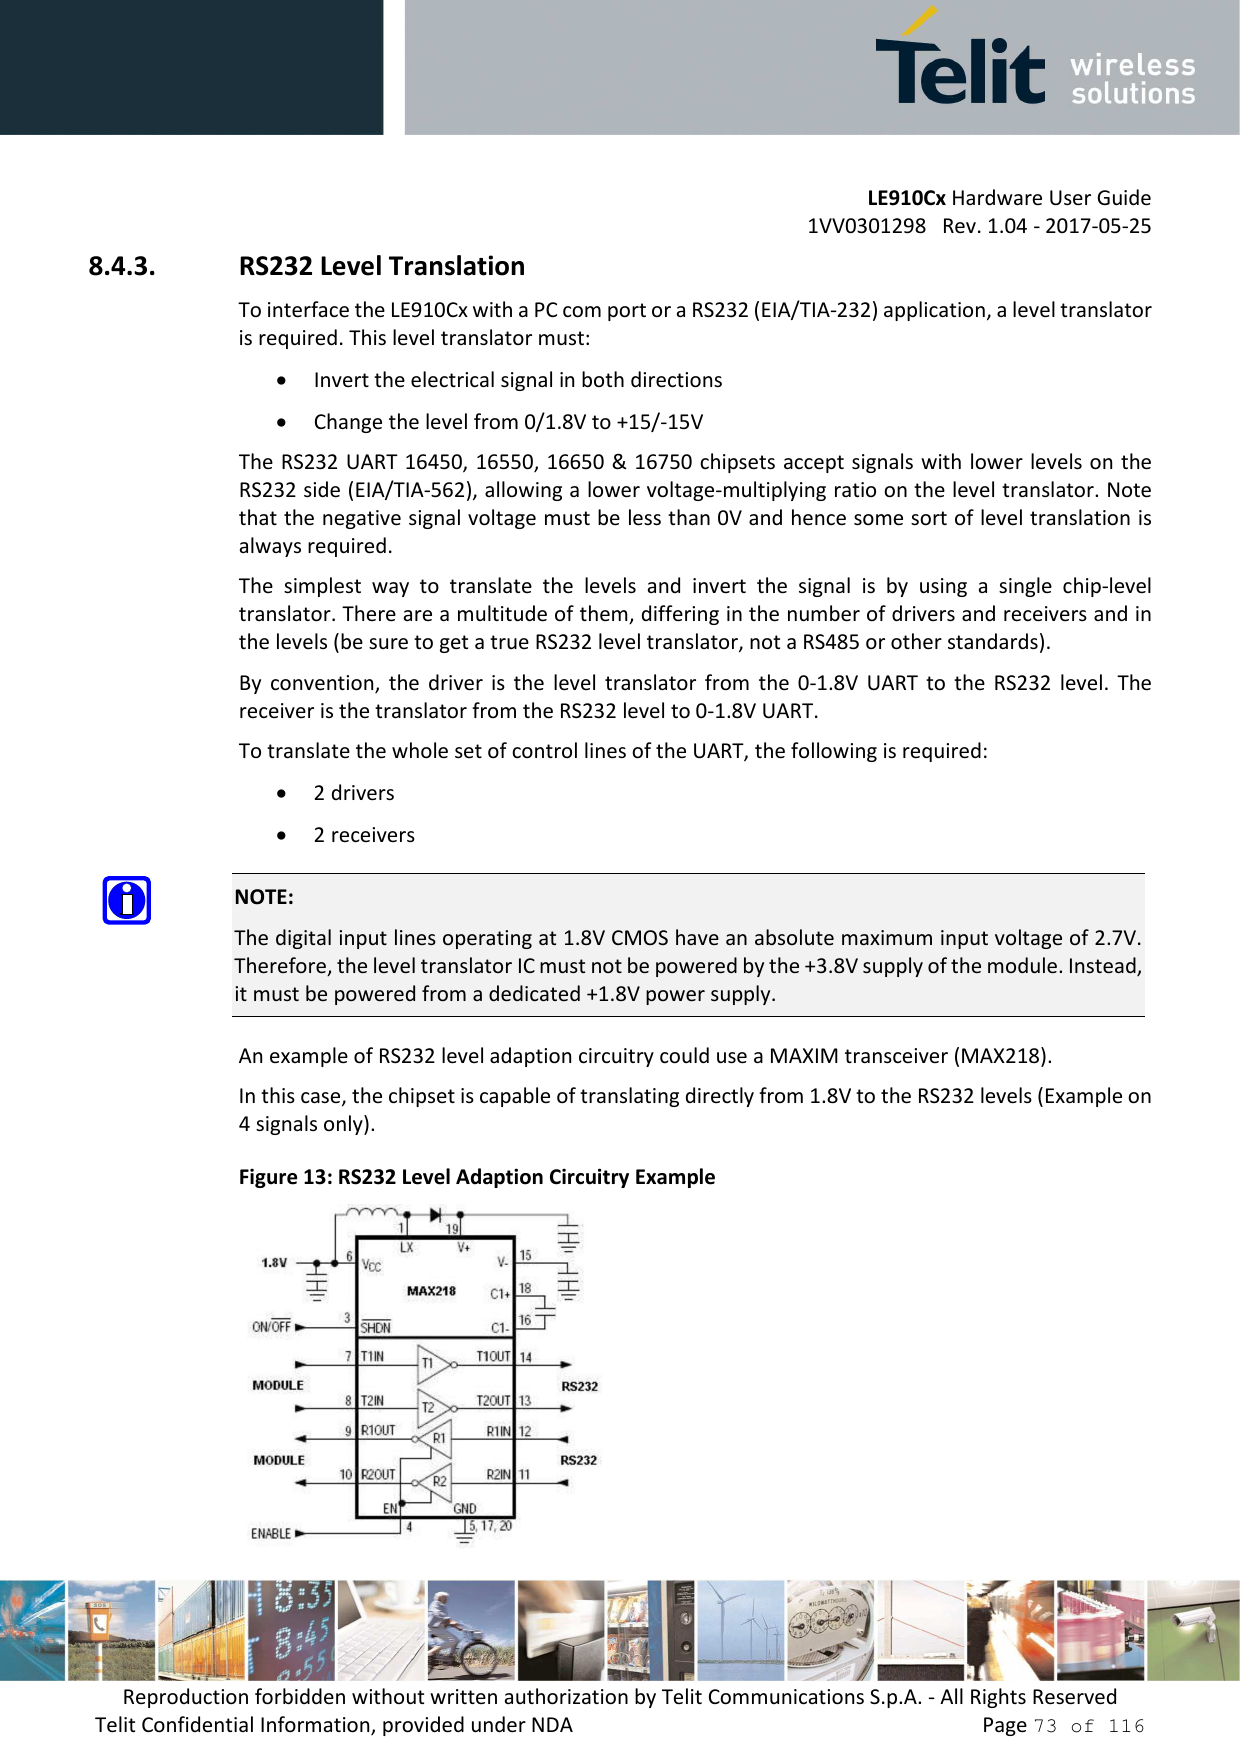         LE910Cx Hardware User Guide 1VV0301298   Rev. 1.04 - 2017-05-25 Reproduction forbidden without written authorization by Telit Communications S.p.A. - All Rights Reserved Telit Confidential Information, provided under NDA                 Page 73 of 116 8.4.3. RS232 Level Translation To interface the LE910Cx with a PC com port or a RS232 (EIA/TIA-232) application, a level translator is required. This level translator must: • Invert the electrical signal in both directions • Change the level from 0/1.8V to +15/-15V The RS232 UART 16450, 16550, 16650 &amp; 16750 chipsets accept signals with lower levels on the RS232 side (EIA/TIA-562), allowing a lower voltage-multiplying ratio on the level translator. Note that the negative signal voltage must be less than 0V and hence some sort of level translation is always required.  The  simplest  way  to  translate  the  levels  and  invert  the  signal  is  by  using  a  single  chip-level translator. There are a multitude of them, differing in the number of drivers and receivers and in the levels (be sure to get a true RS232 level translator, not a RS485 or other standards). By  convention,  the  driver  is  the  level  translator  from  the  0-1.8V  UART  to  the  RS232  level.  The receiver is the translator from the RS232 level to 0-1.8V UART. To translate the whole set of control lines of the UART, the following is required: • 2 drivers • 2 receivers  NOTE: The digital input lines operating at 1.8V CMOS have an absolute maximum input voltage of 2.7V. Therefore, the level translator IC must not be powered by the +3.8V supply of the module. Instead, it must be powered from a dedicated +1.8V power supply.  An example of RS232 level adaption circuitry could use a MAXIM transceiver (MAX218).  In this case, the chipset is capable of translating directly from 1.8V to the RS232 levels (Example on 4 signals only). Figure 13: RS232 Level Adaption Circuitry Example  